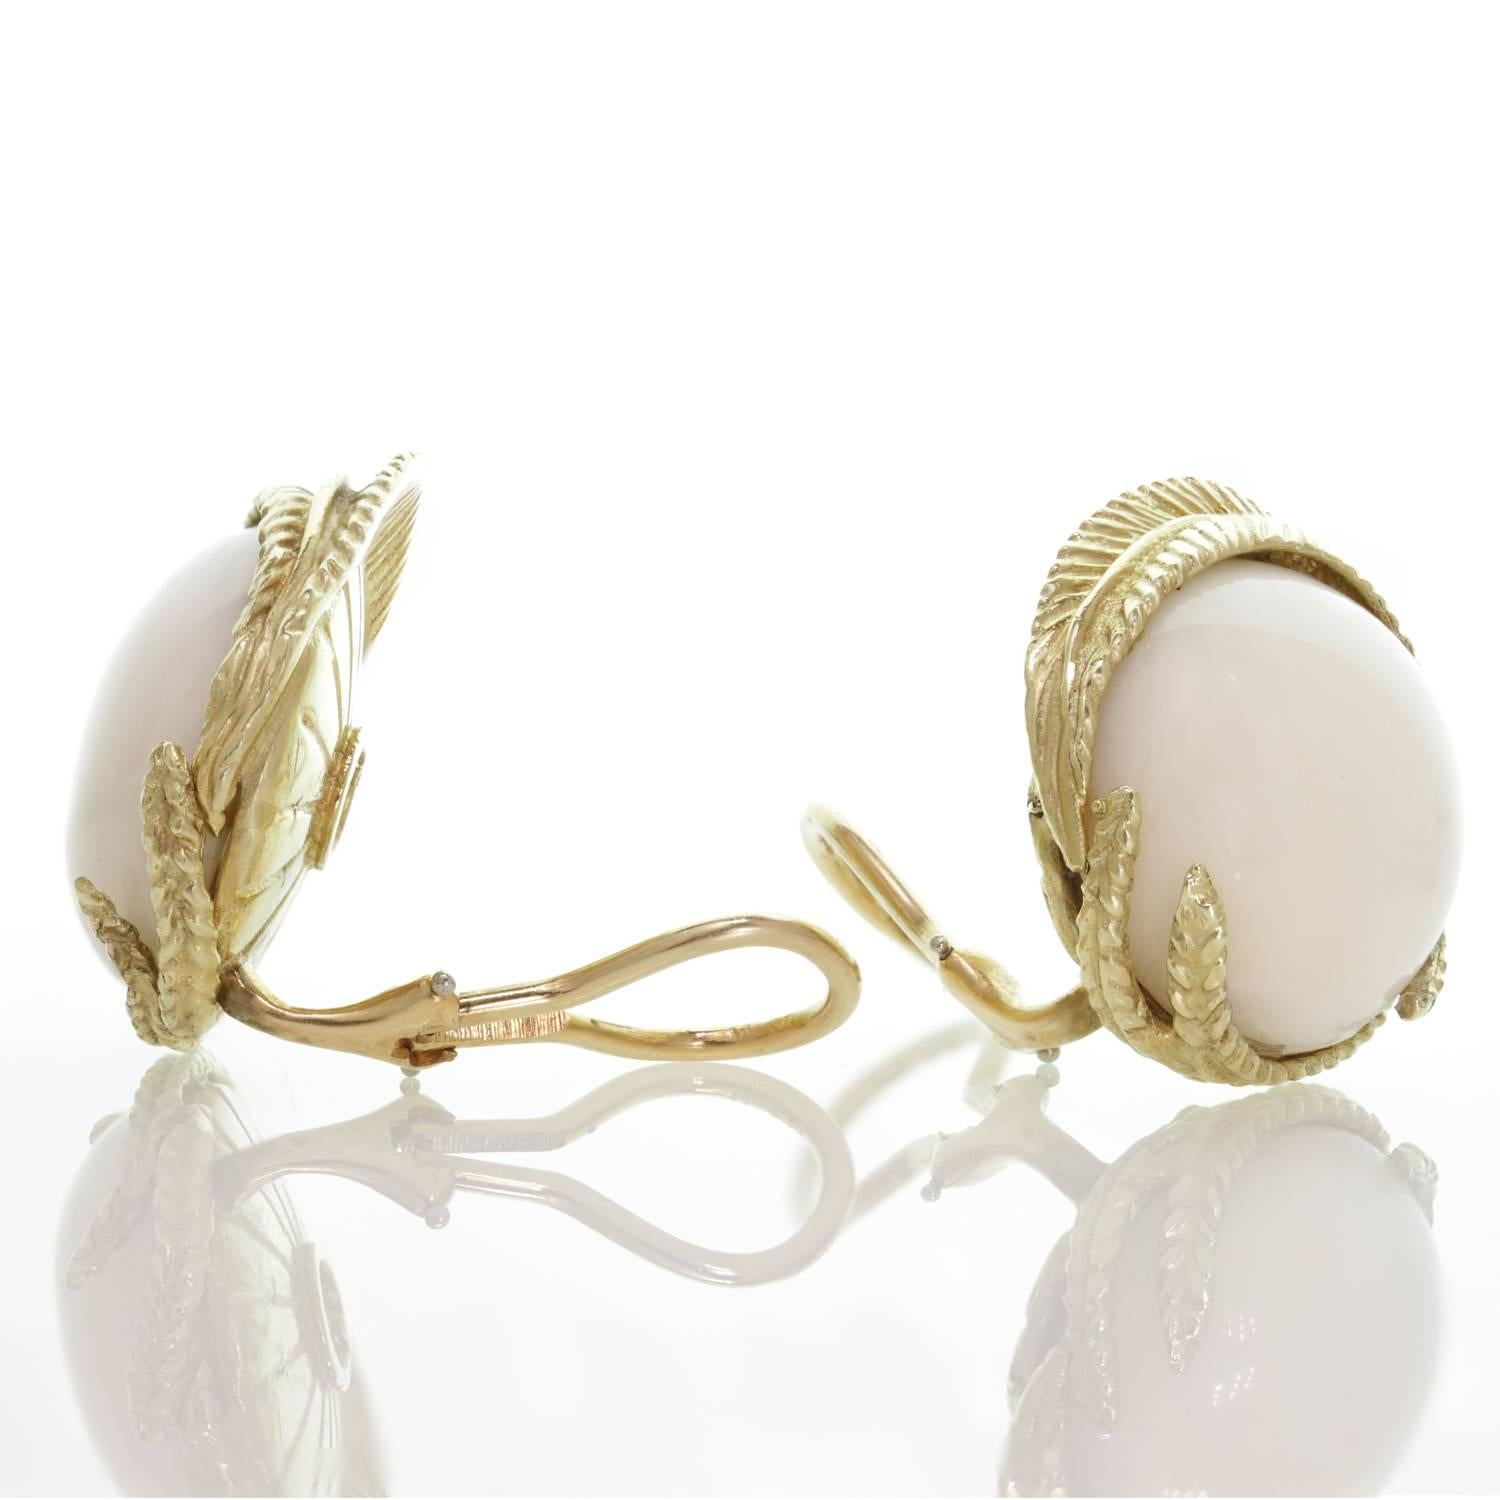 These fabulous clip-on earrings feature 17.0mm round natural white corals set in yellow gold. Circa 1960s. Measurements: 0.94